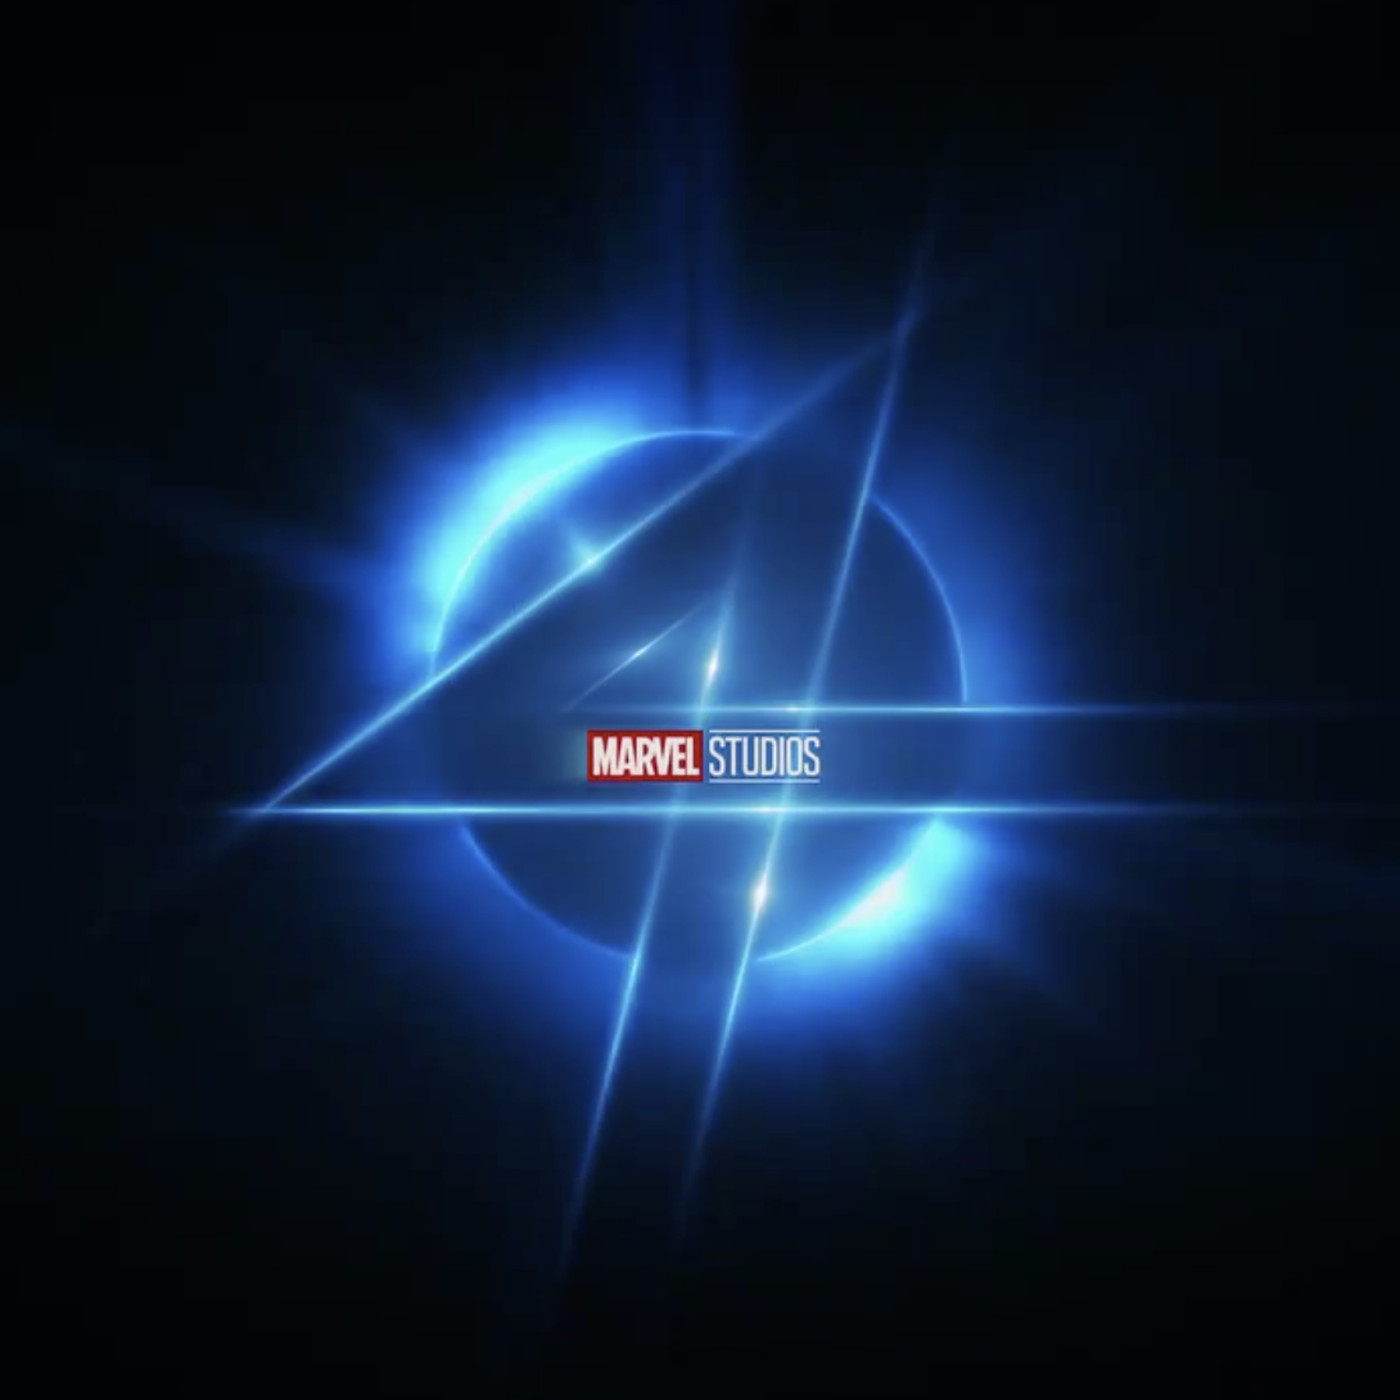 Confirmed Upcoming Marvel Movies 